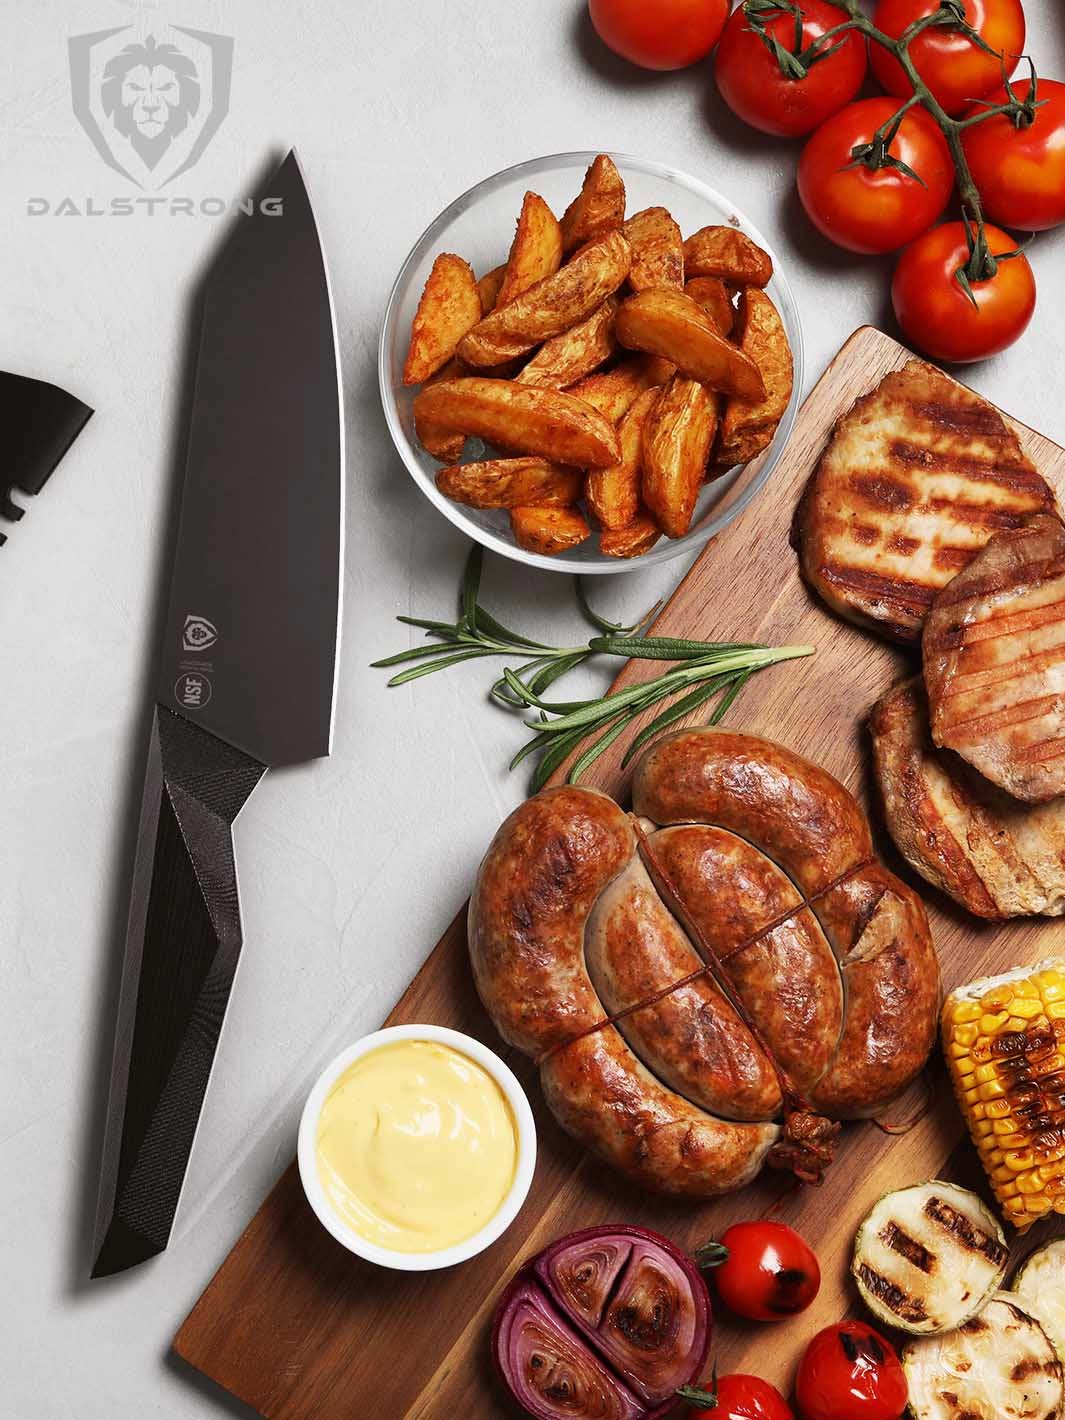 Dalstrong shawdow black series 6 inch chef knife with barbecue meats on a cutting board.